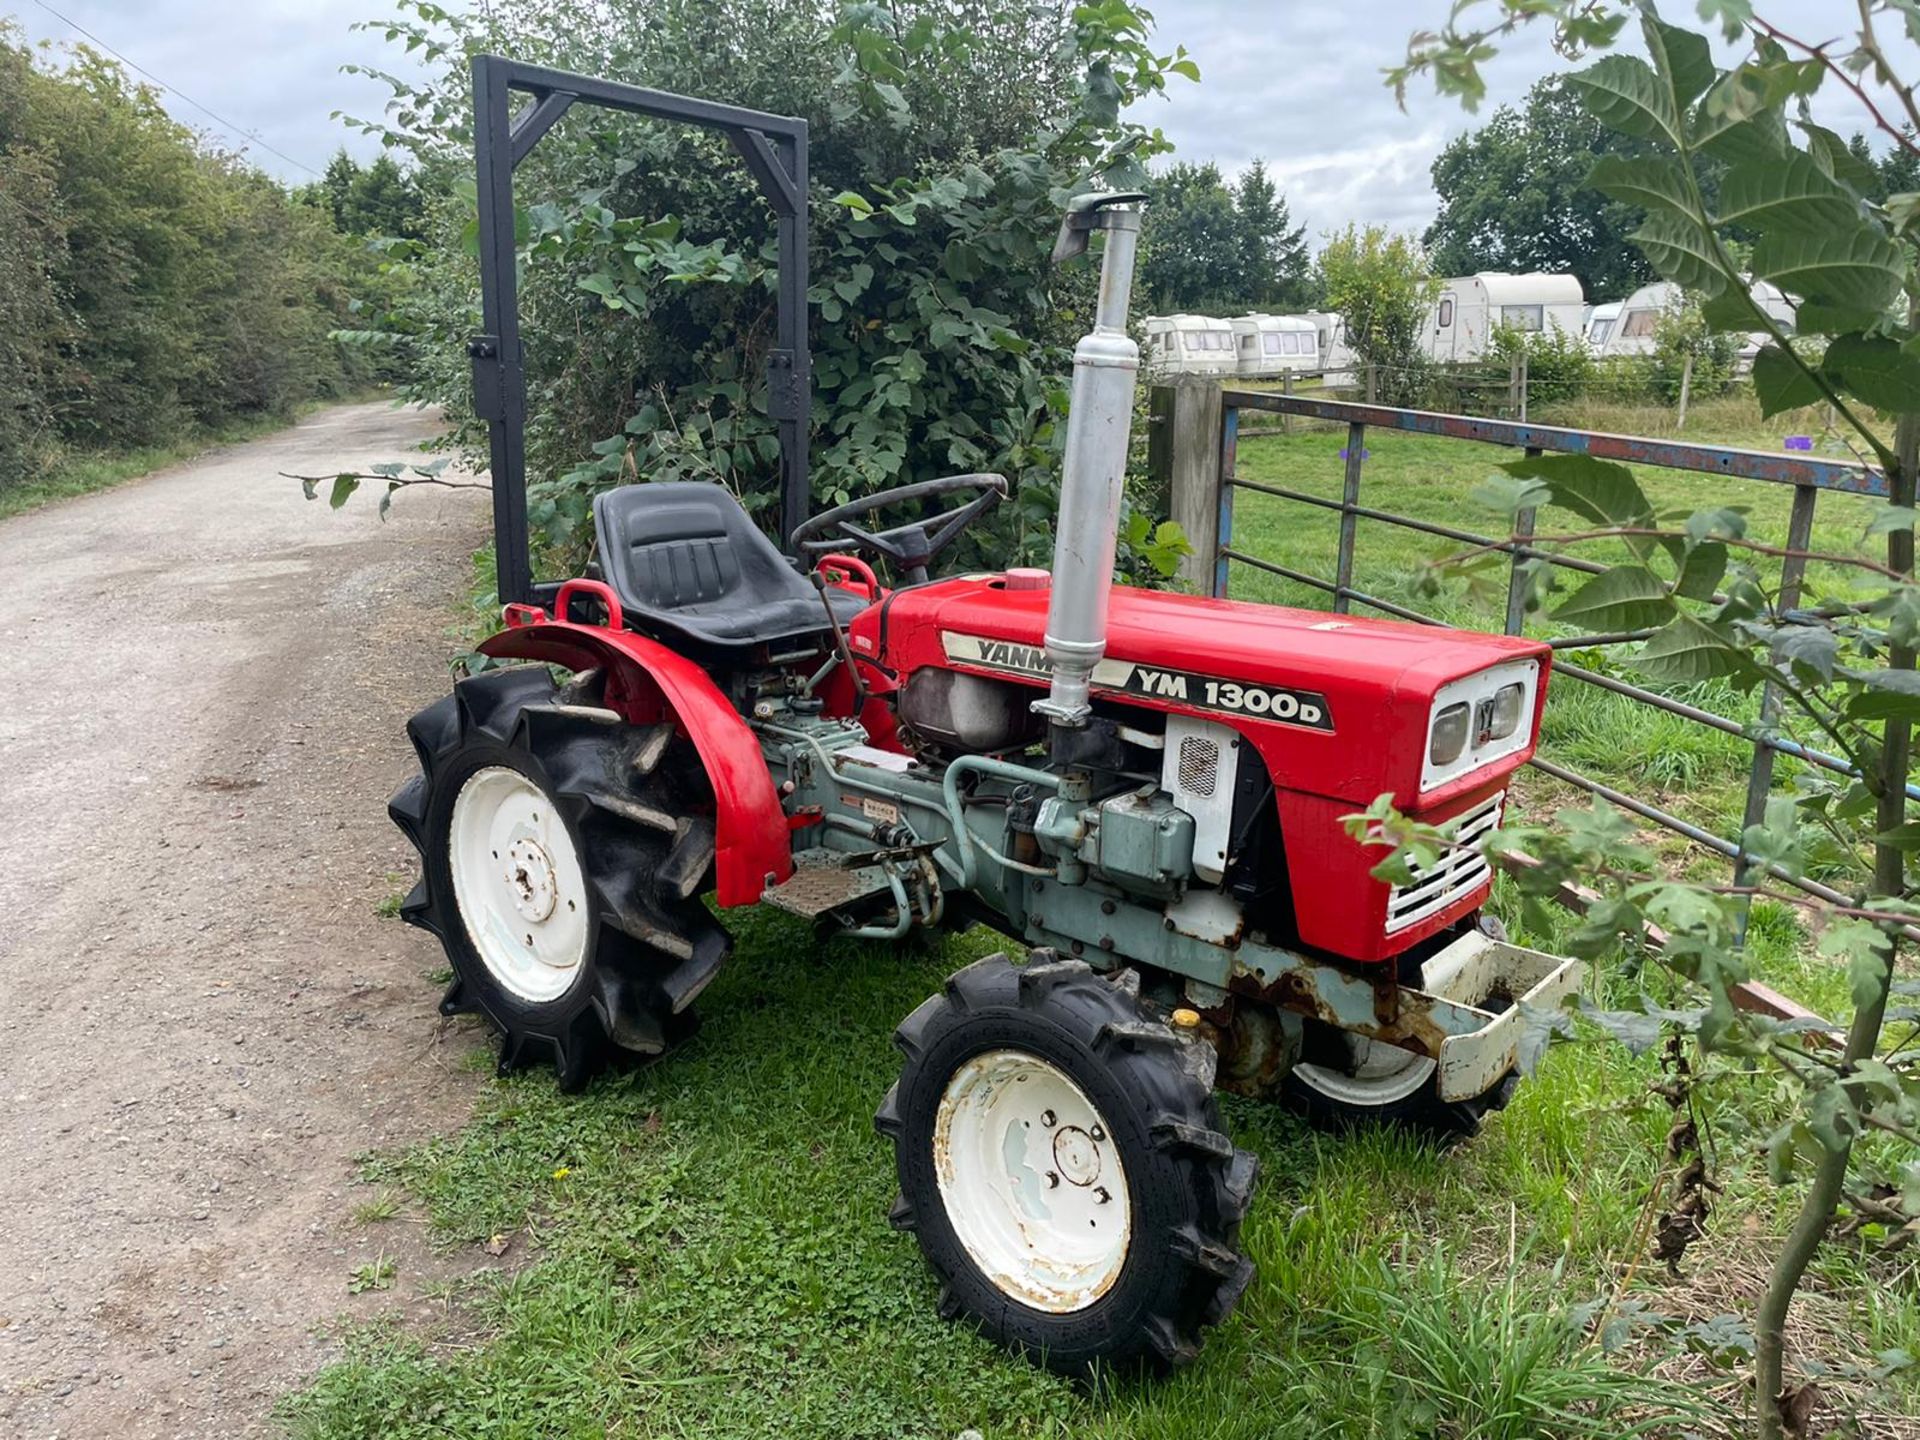 YANMAR YM1300D DIESEL COMPACT TRACTOR, RUNS DRIVES AND WORKS, A LOW 415 HOURS, 13hp *PLUS VAT* - Image 2 of 8